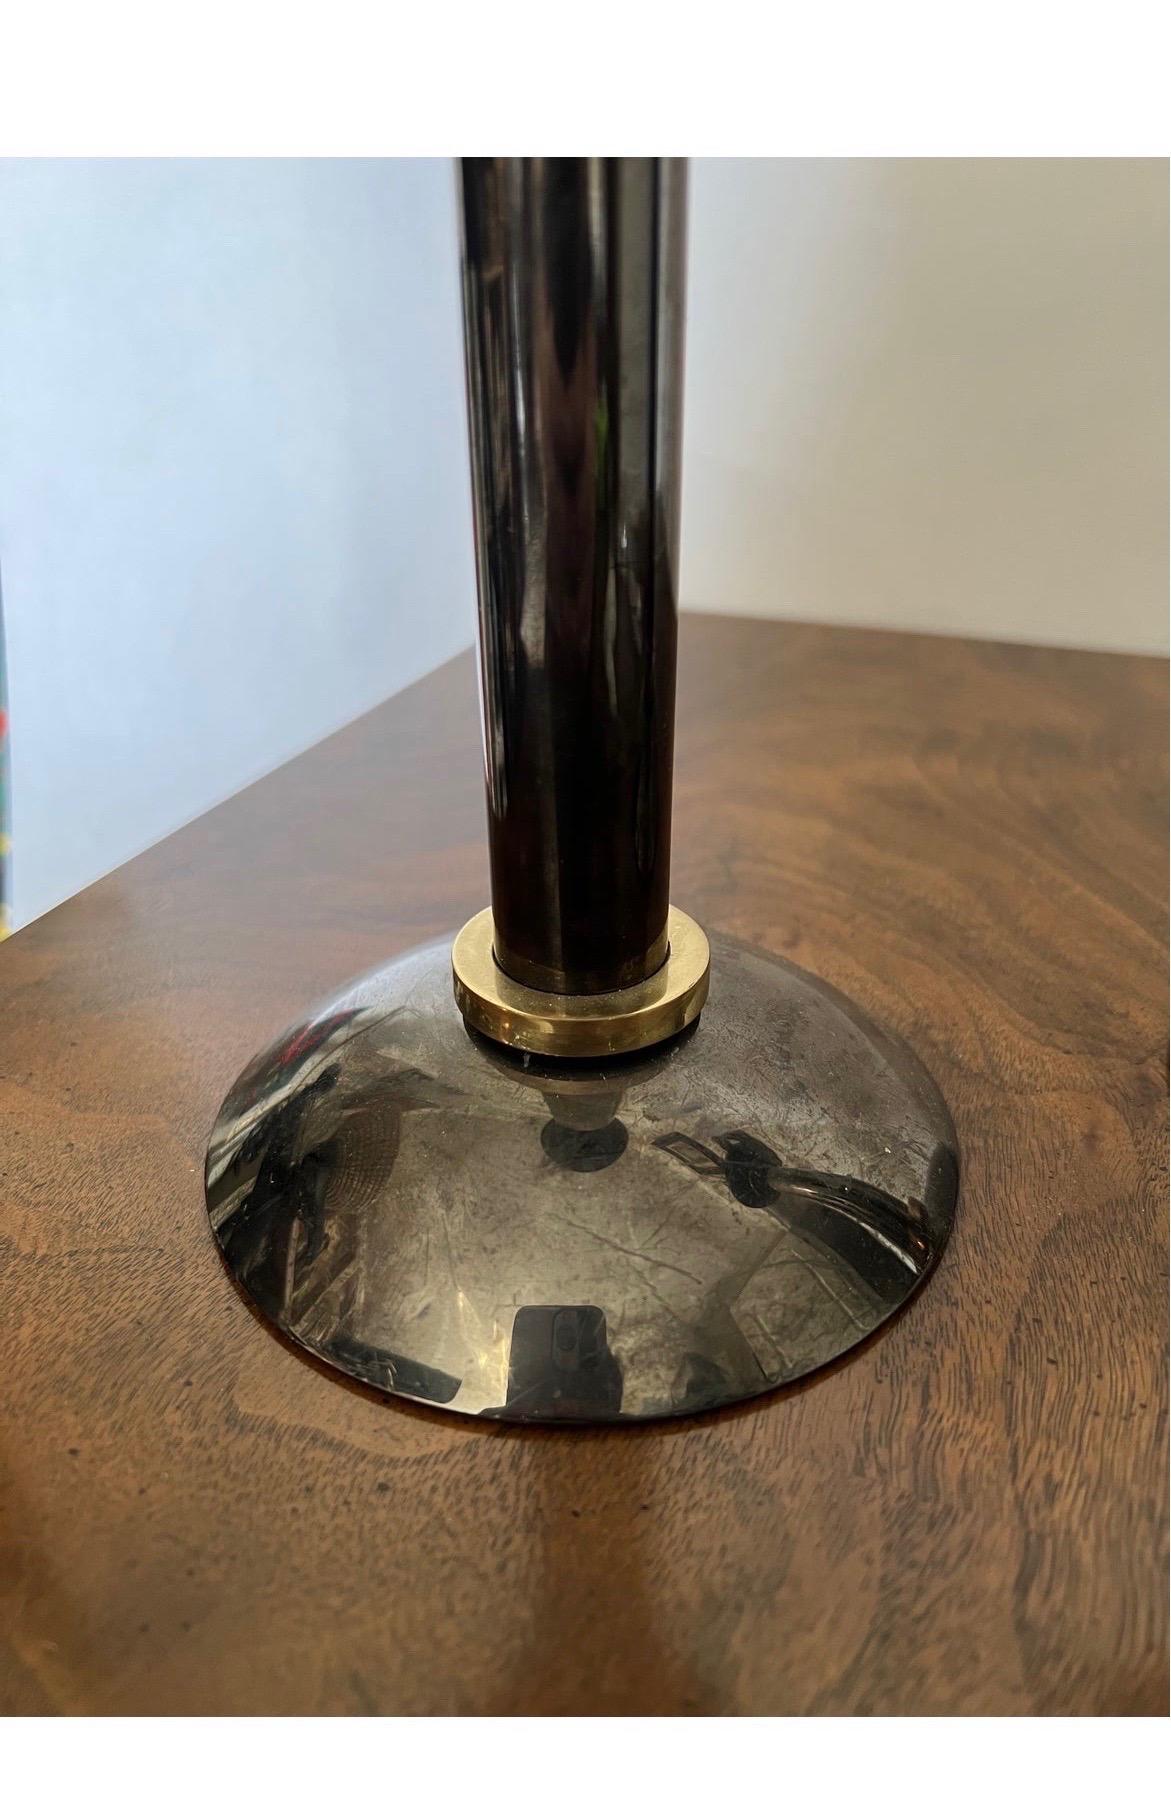 Pair, Karl Springer style gunmetal and brass candlesticks. 
Several identical pairs of candlesticks have been sold with the same attribution.